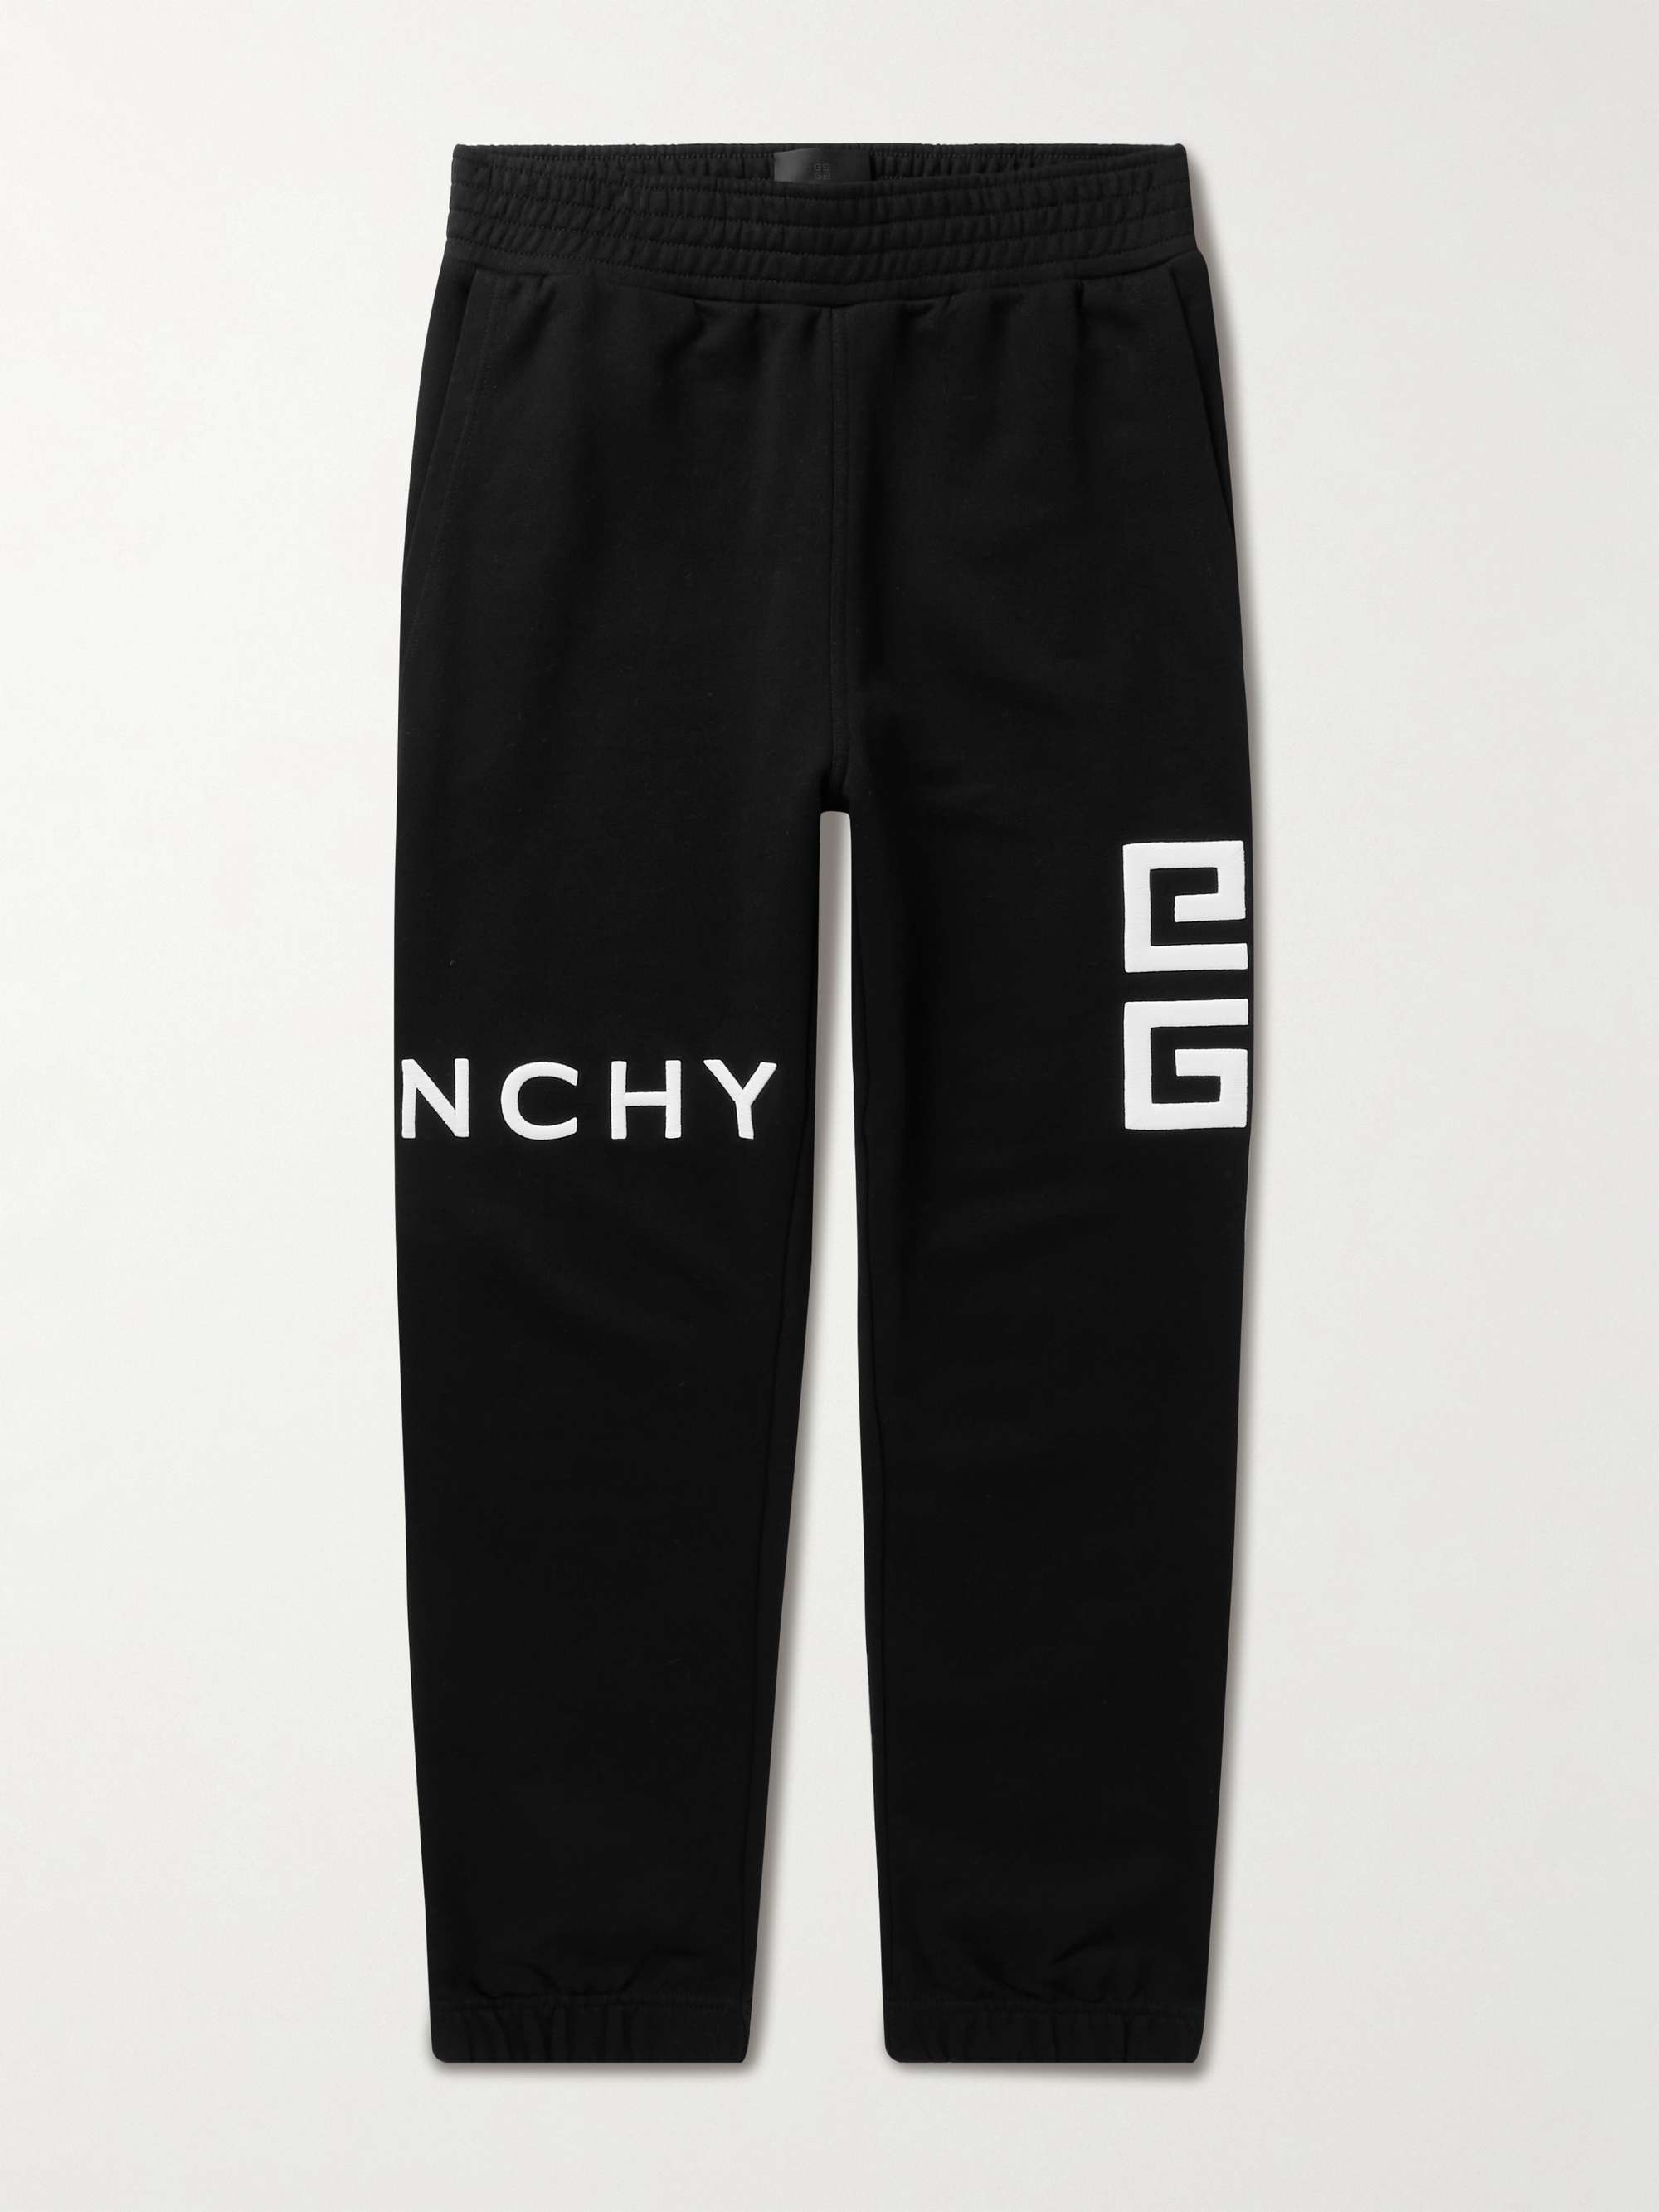 GIVENCHY Slim-Fit Logo-Embroidered Cotton-Jersey Sweatpants for Men